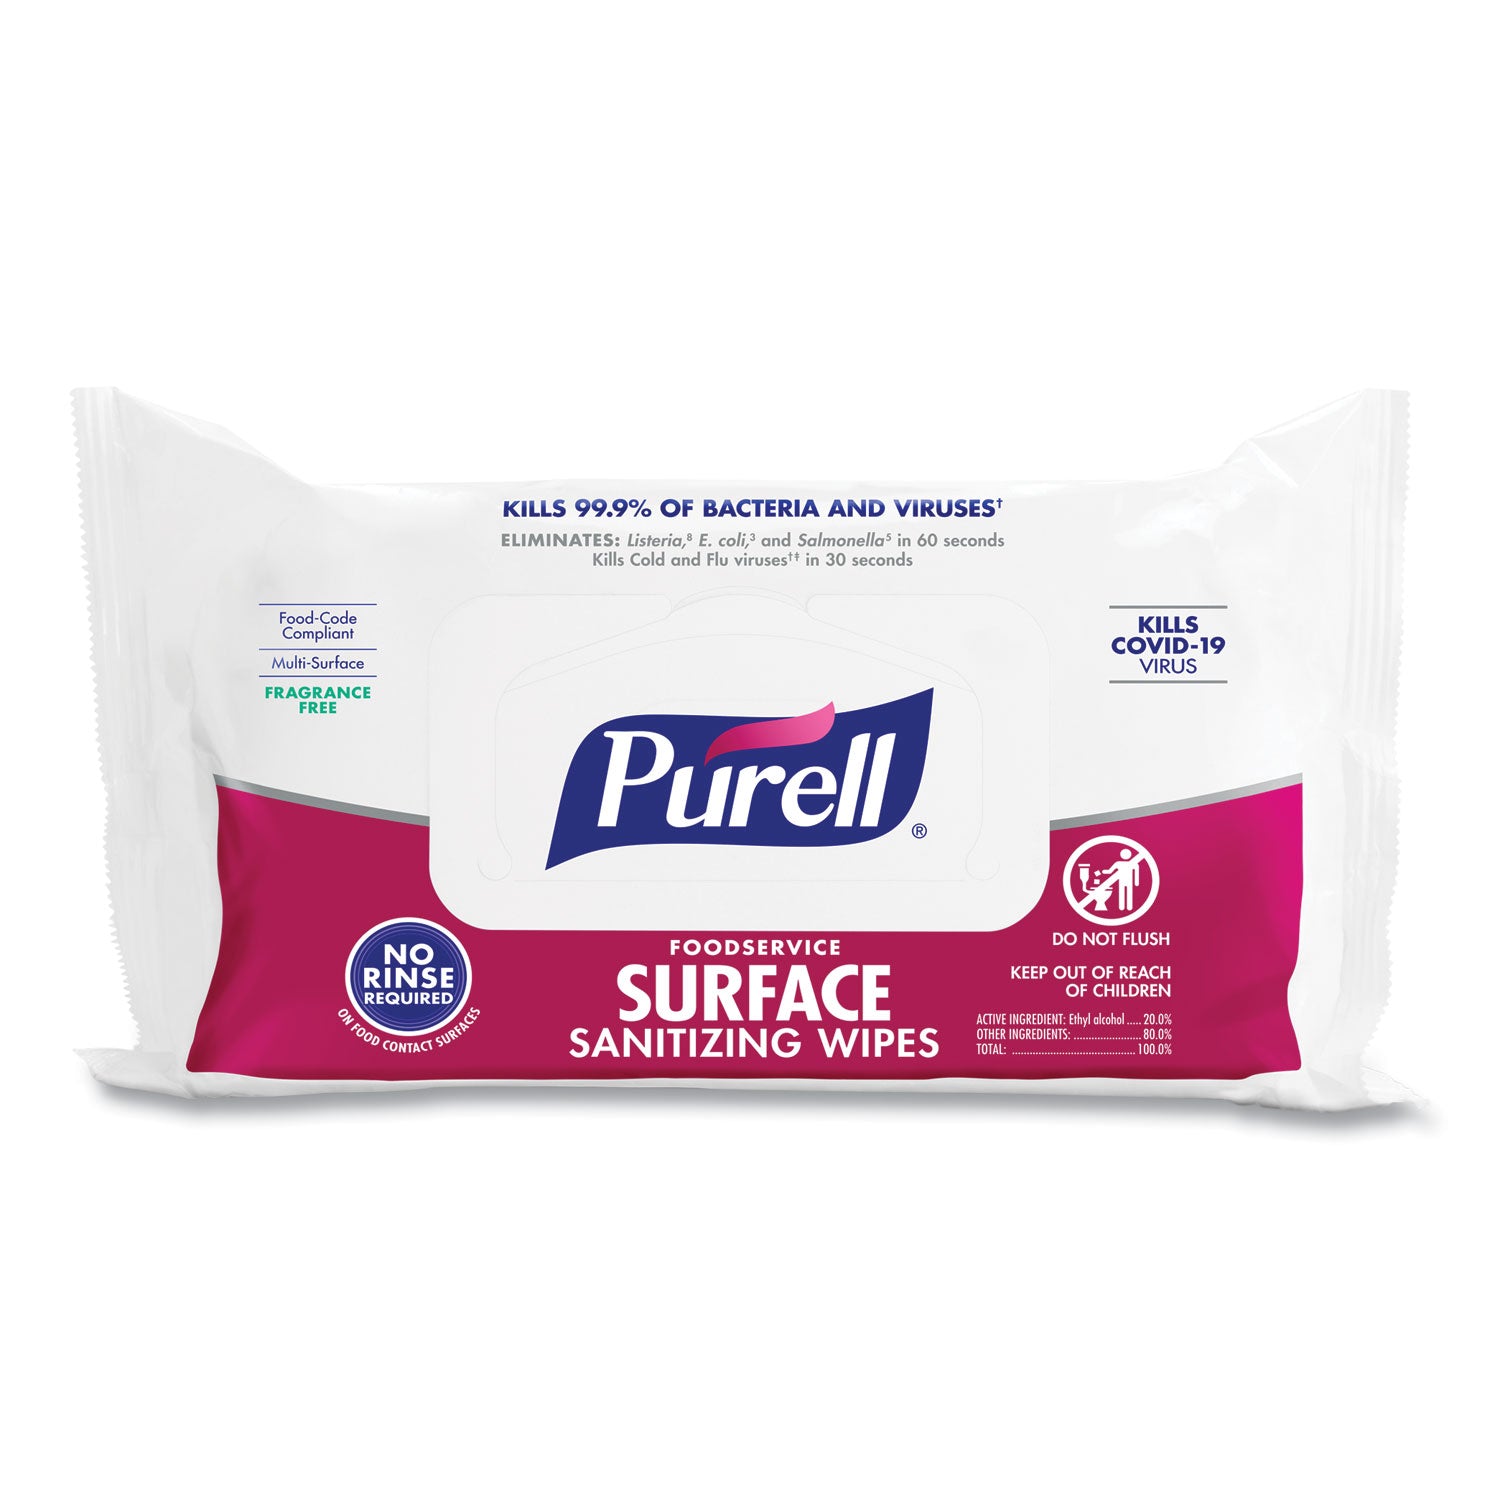 foodservice-surface-sanitizing-wipes-1-ply-74-x-9-fragrance-free-white-72-pouch-12-pouches-carton_goj937112ct - 1